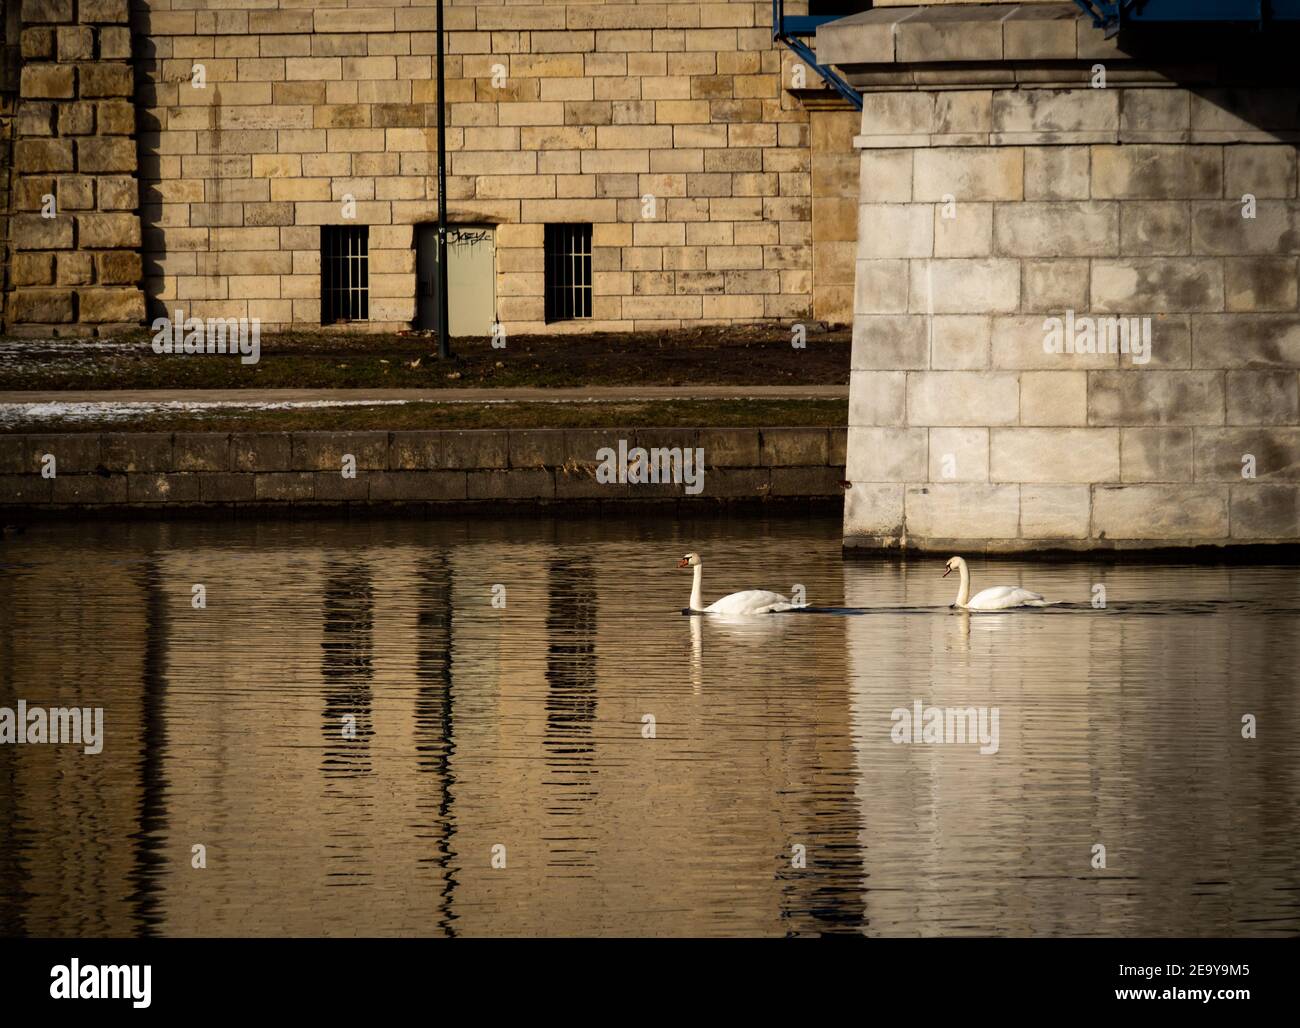 Vistula river, late afternoon - two white swans swimming in the river. Stock Photo